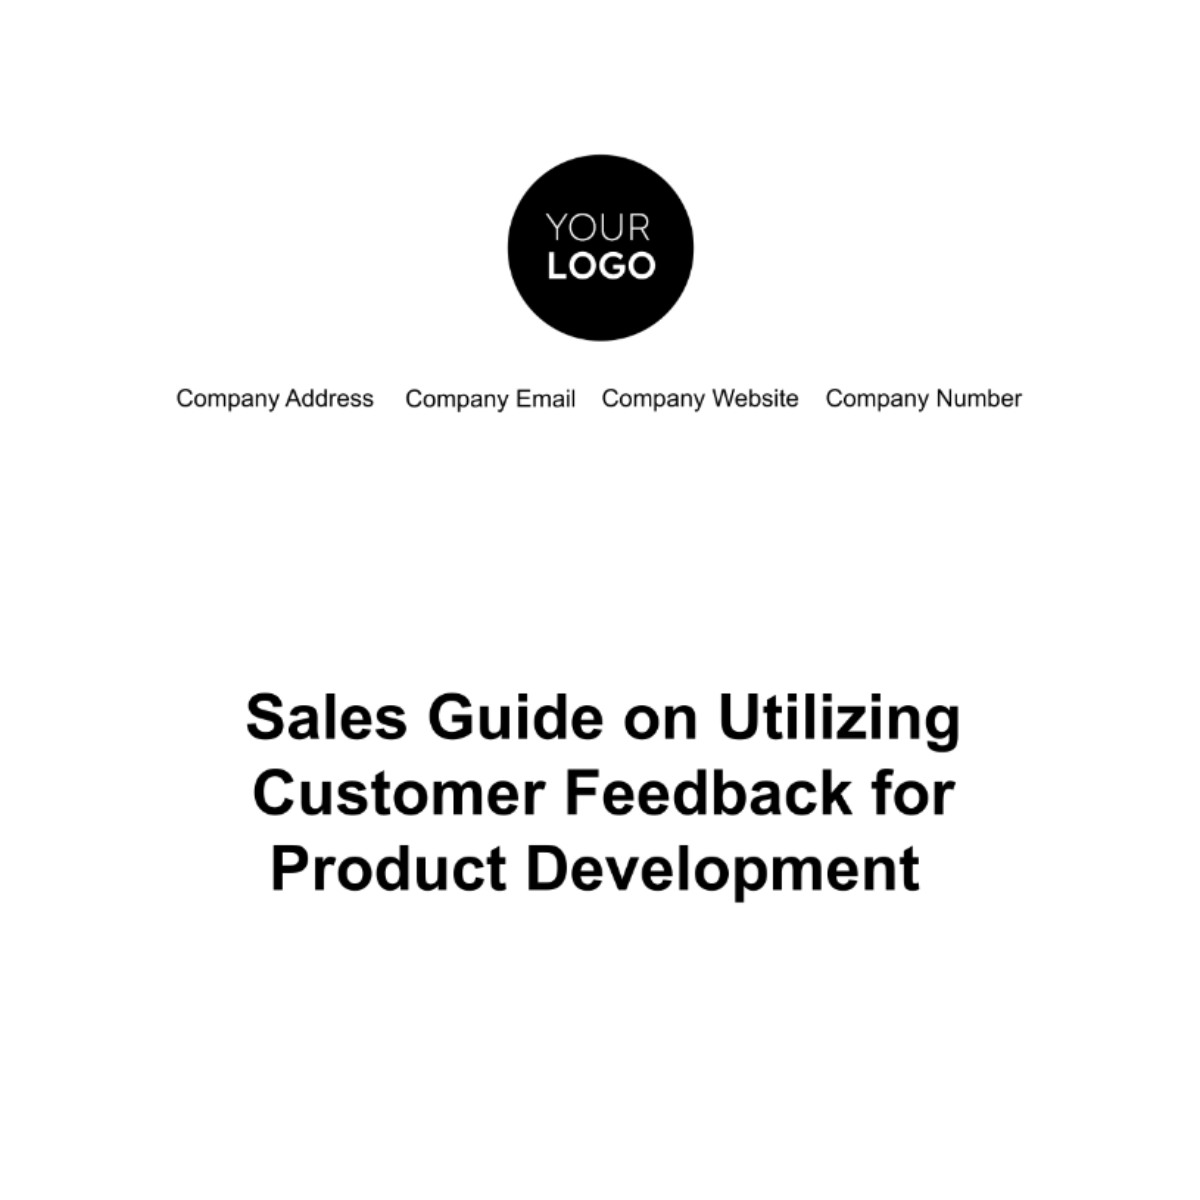 Free Sales Guide on Utilizing Customer Feedback for Product Development Template